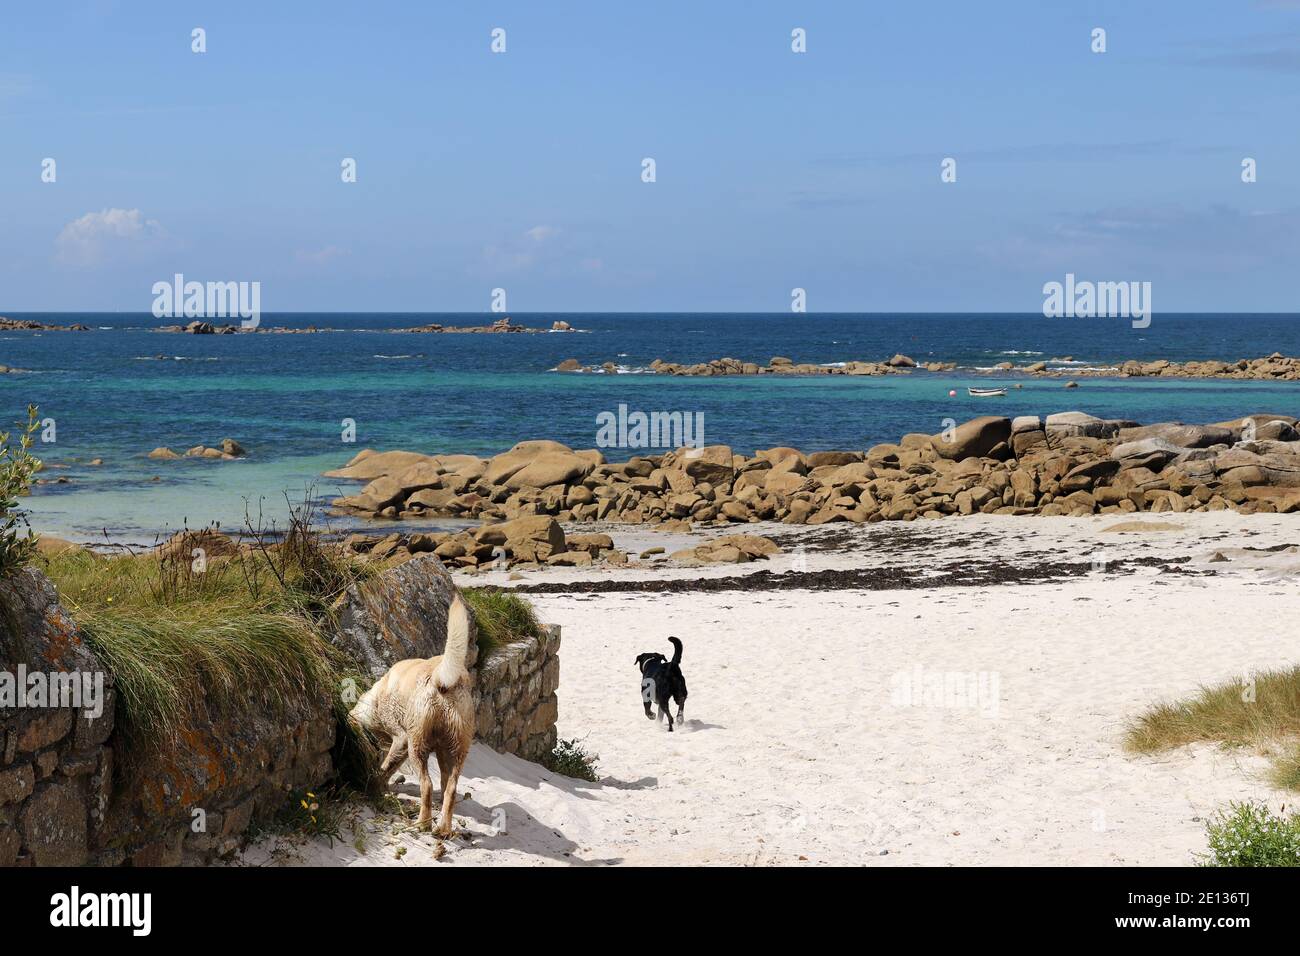 Little beach at Ty Garde in Plouescat, Brittany, France Stock Photo